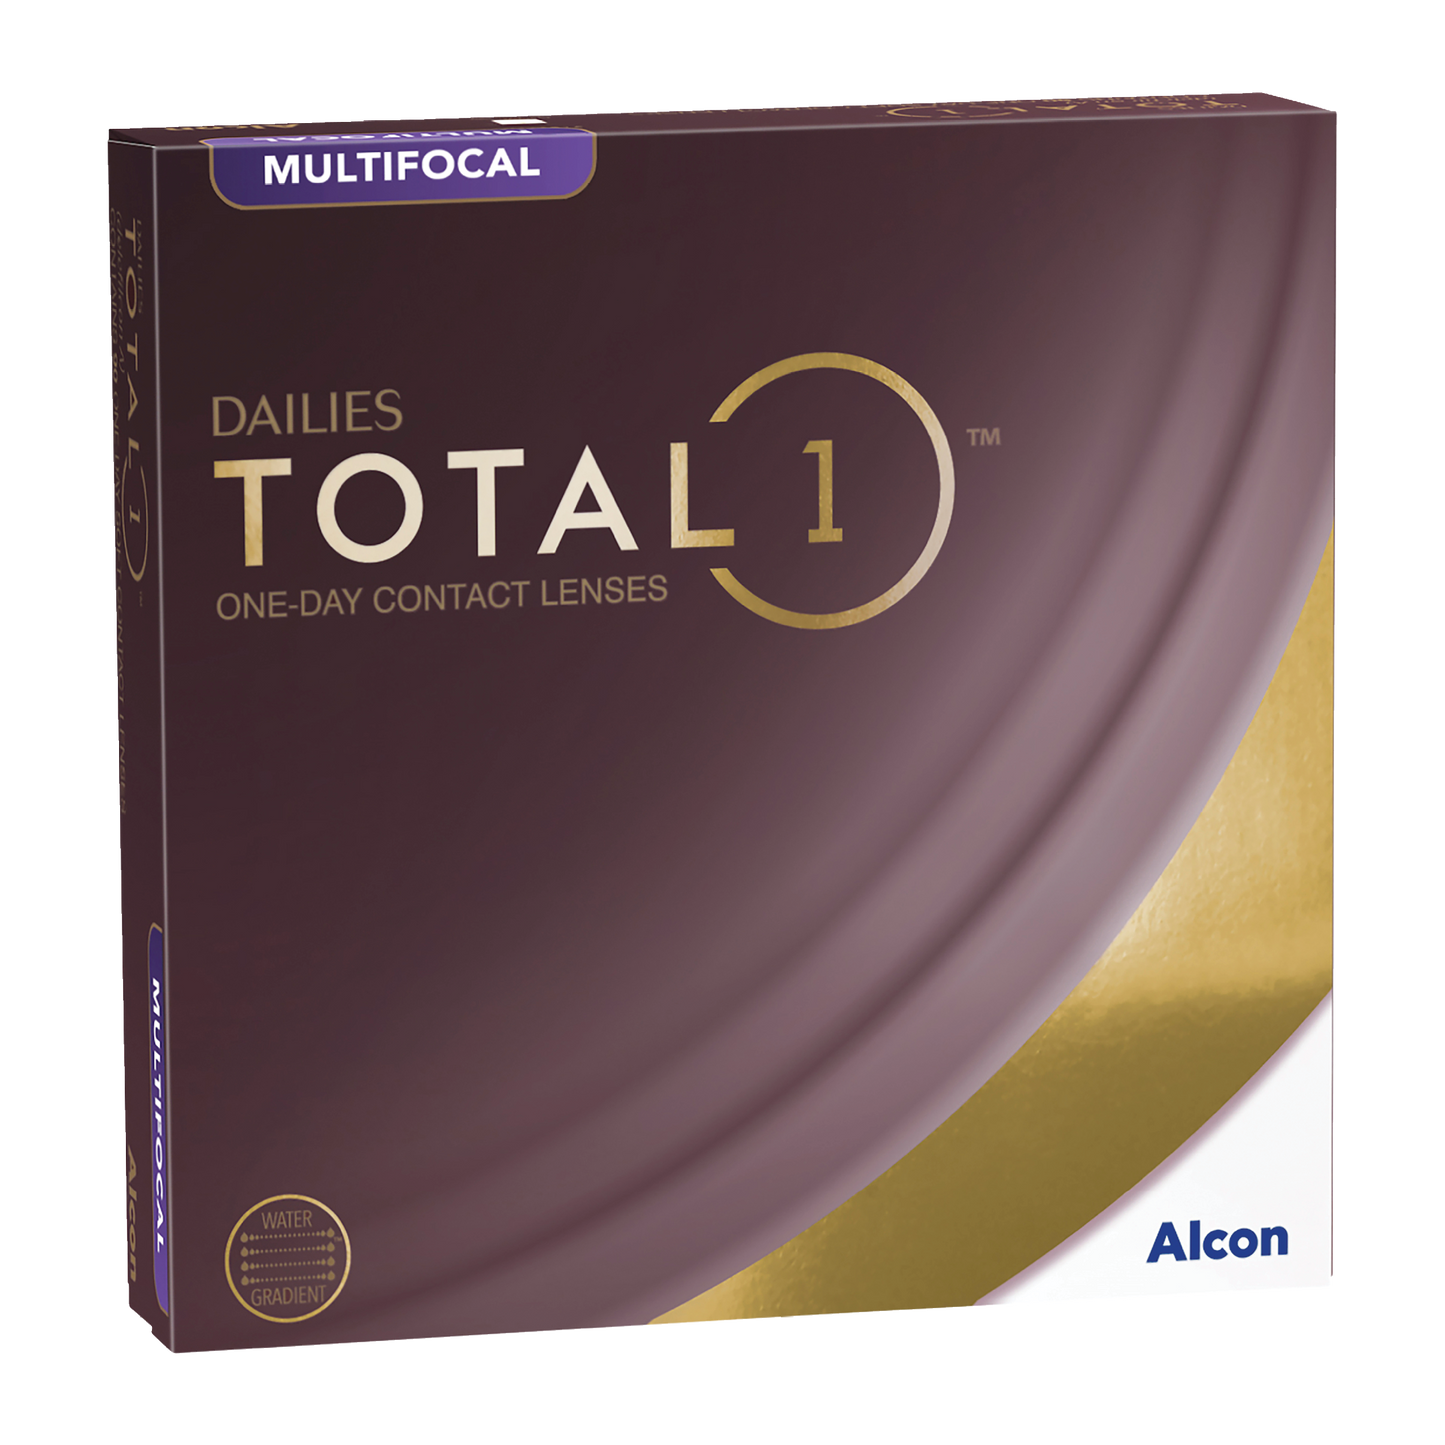 Box of Alcon Dailies Total 1 multifocal contact lenses